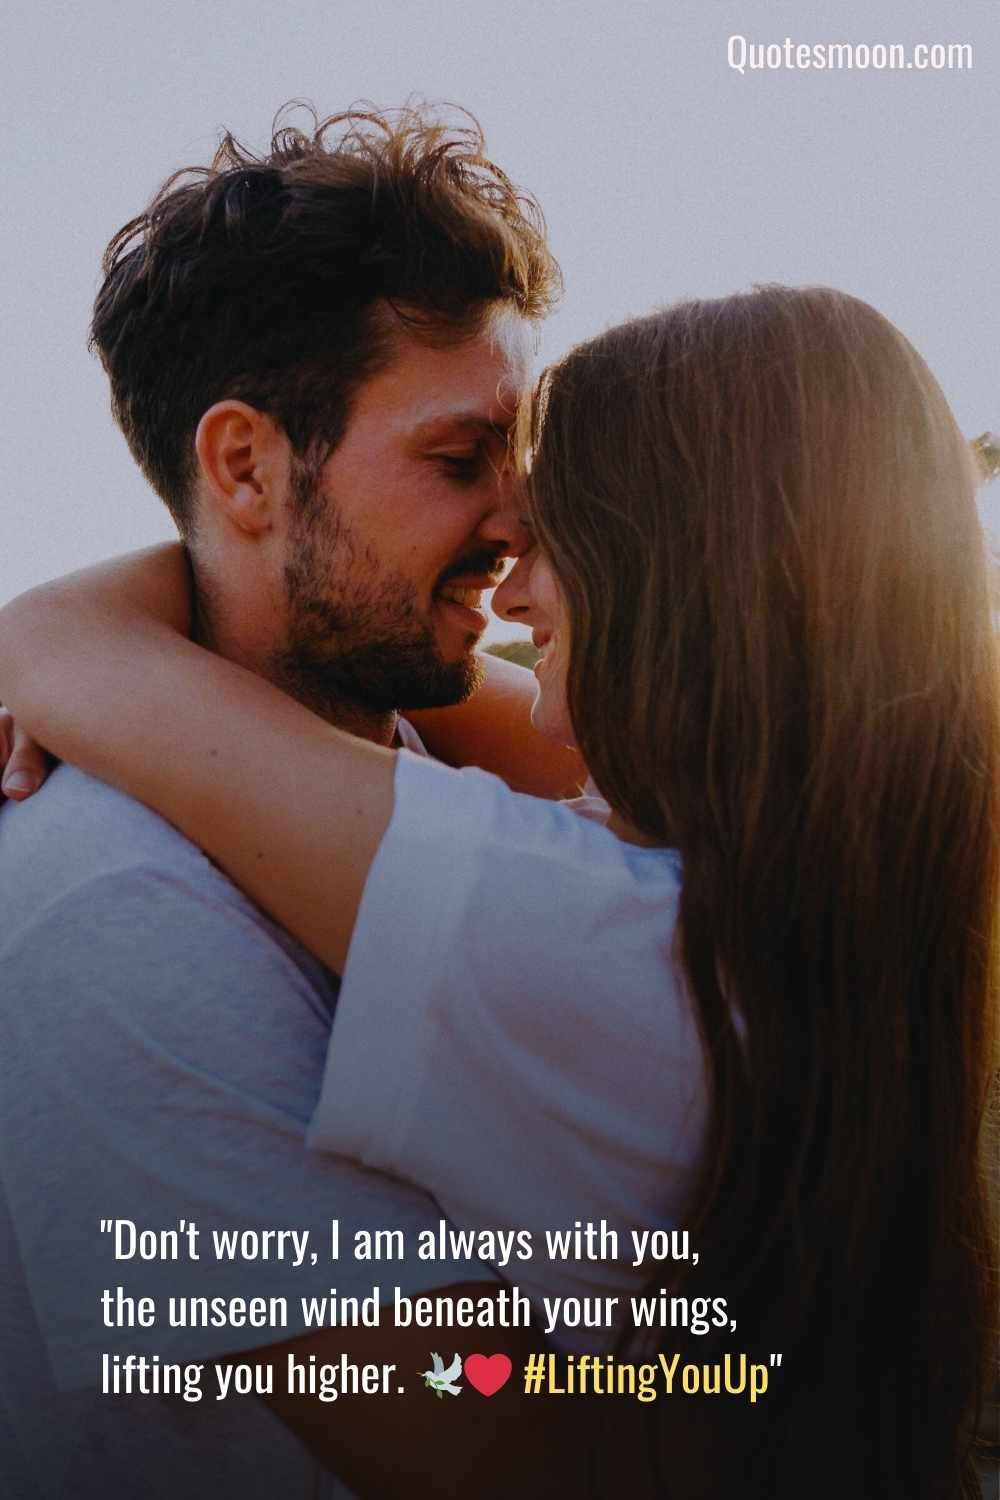 I Will Always Be There For You Quotes with images